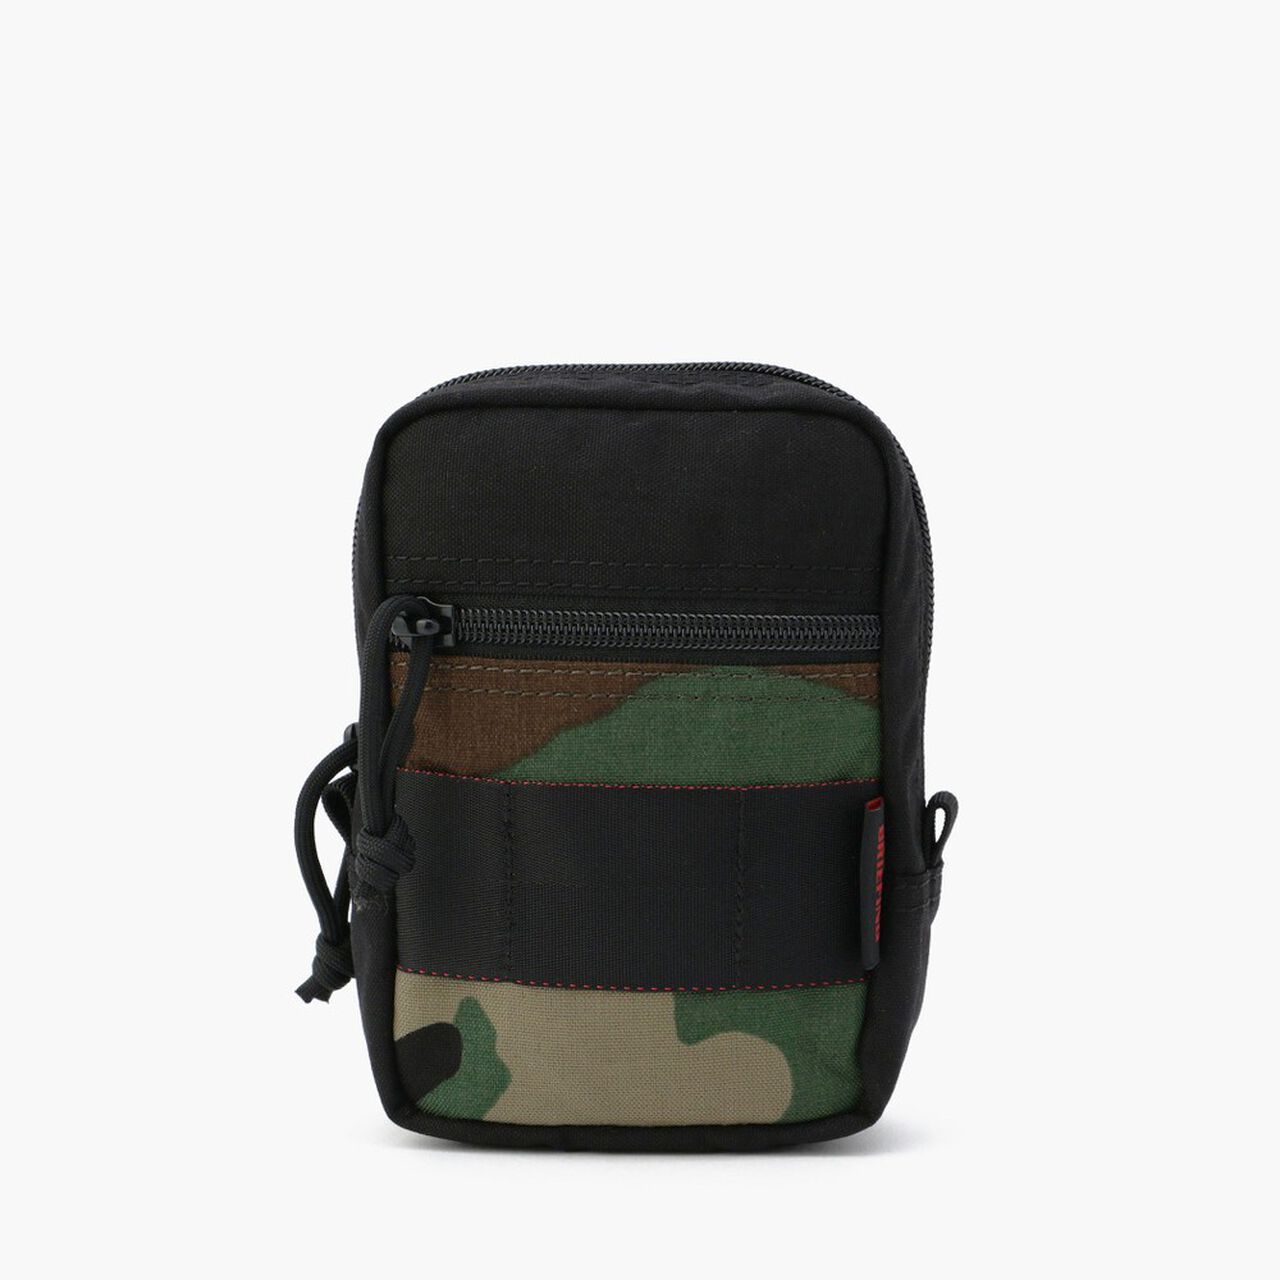 AT-BOX POUCH M CAMO MIX,, large image number 0